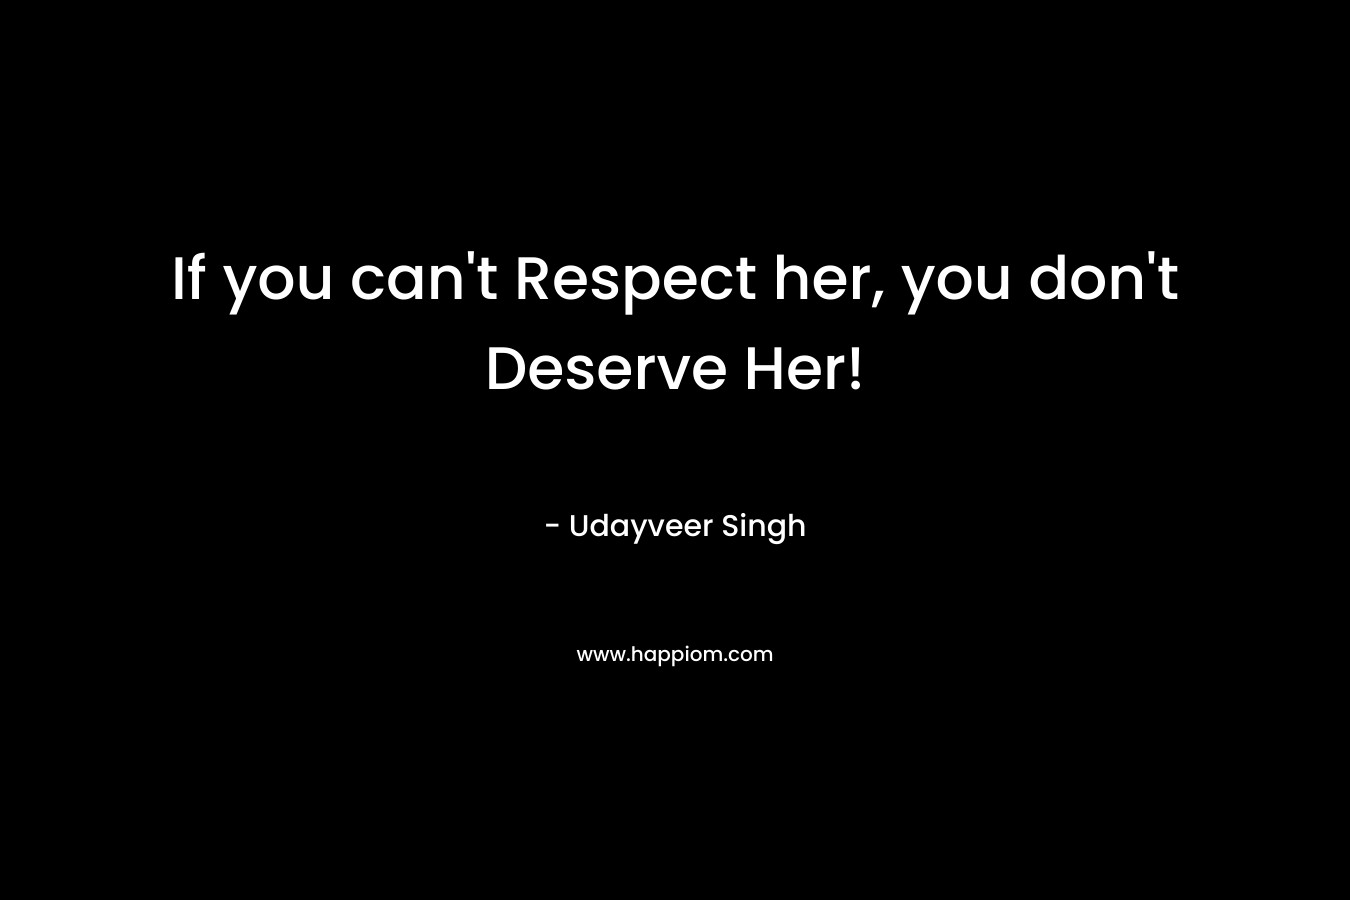 If you can't Respect her, you don't Deserve Her!